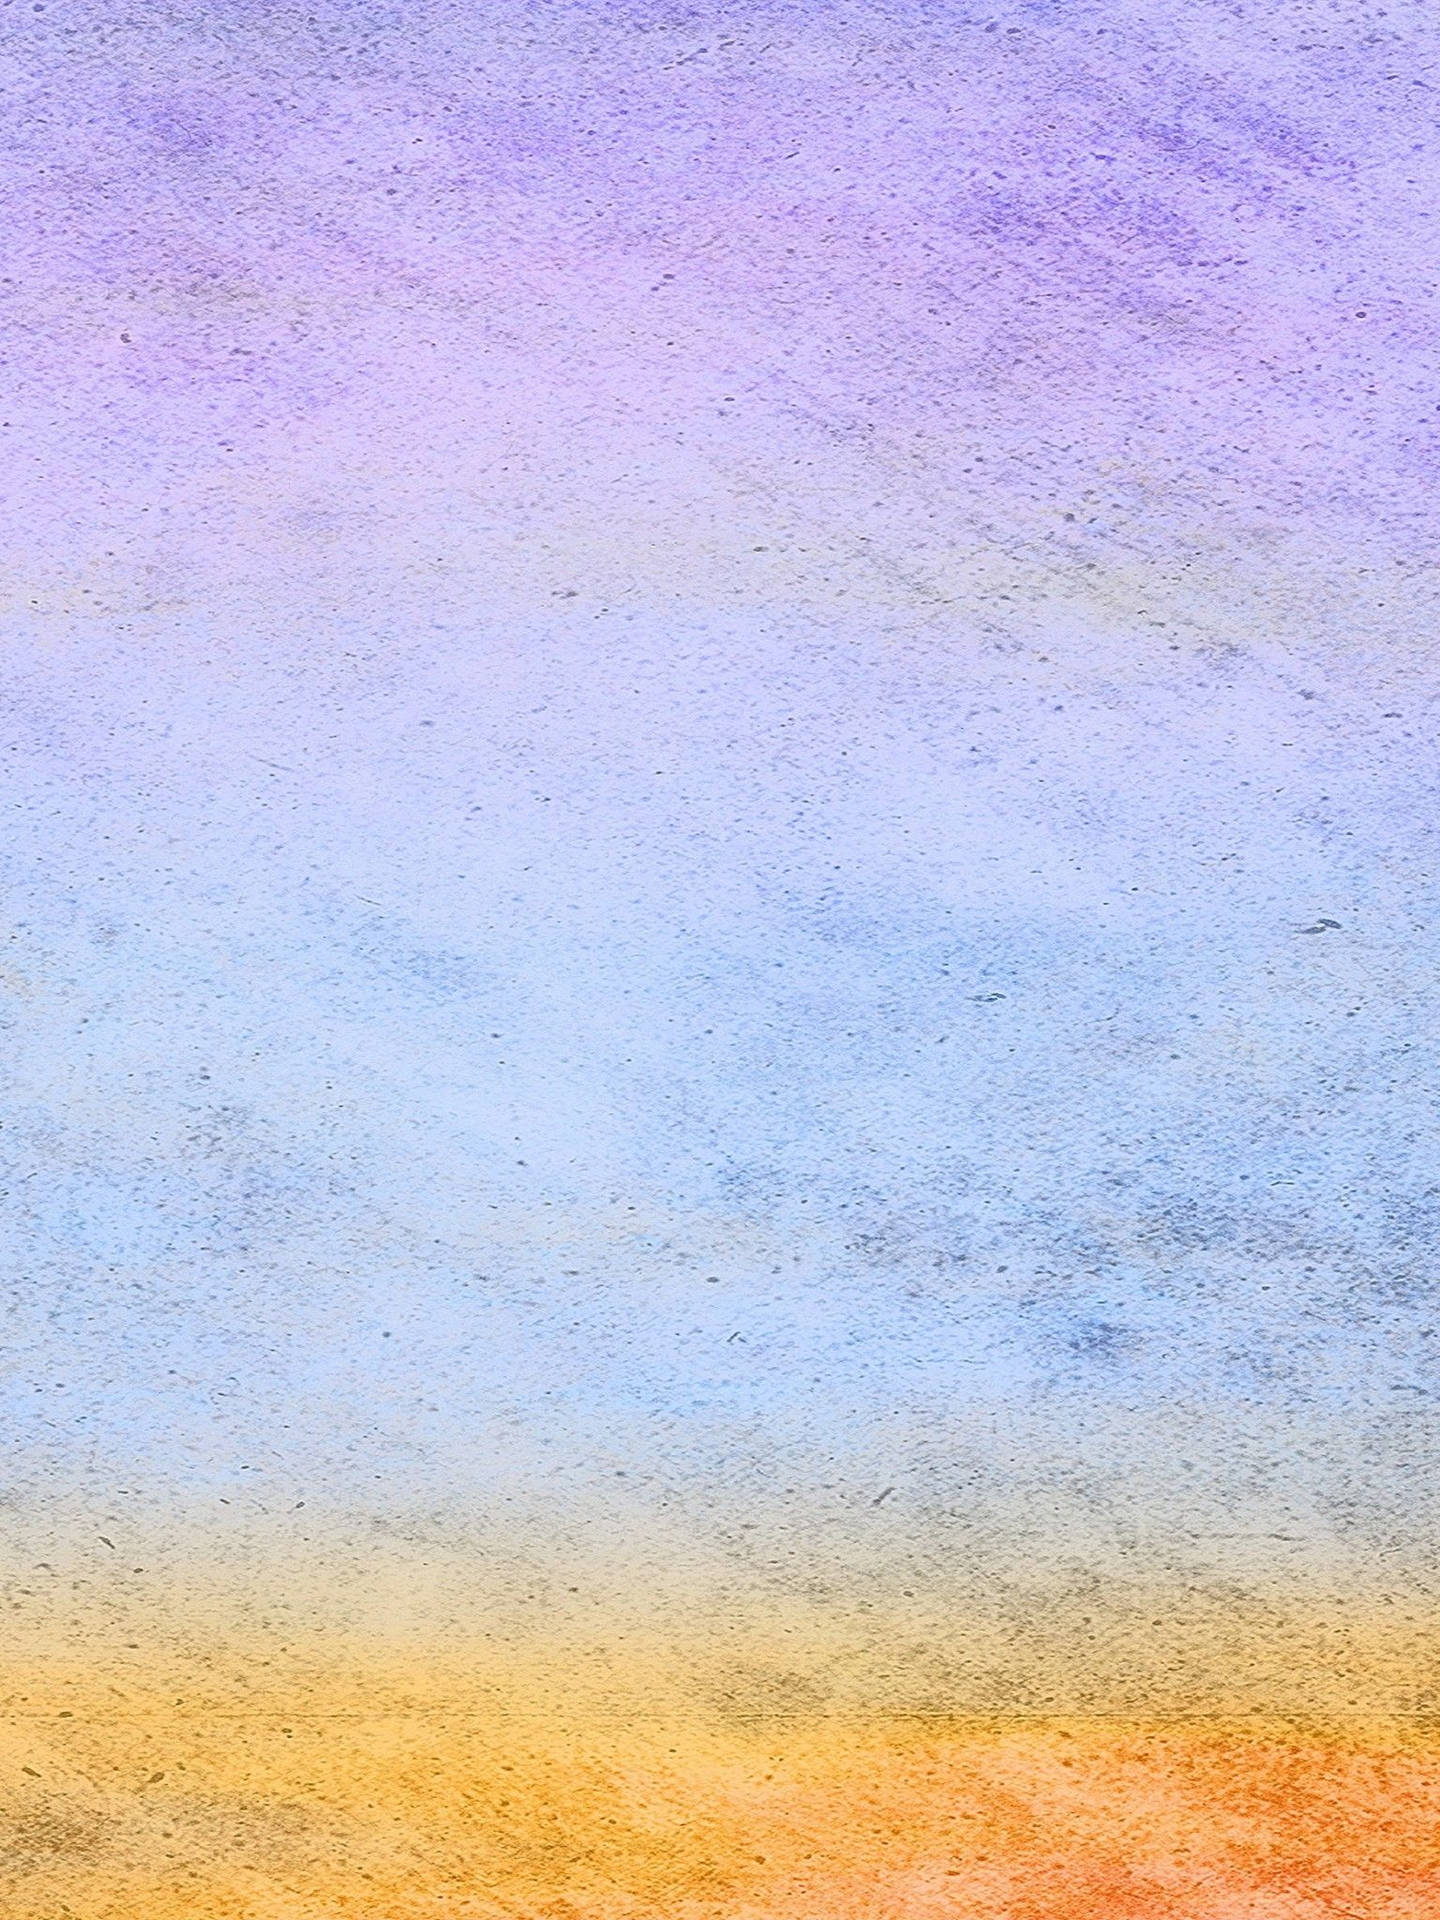 Pastel Ipad Gradient Wall Picture